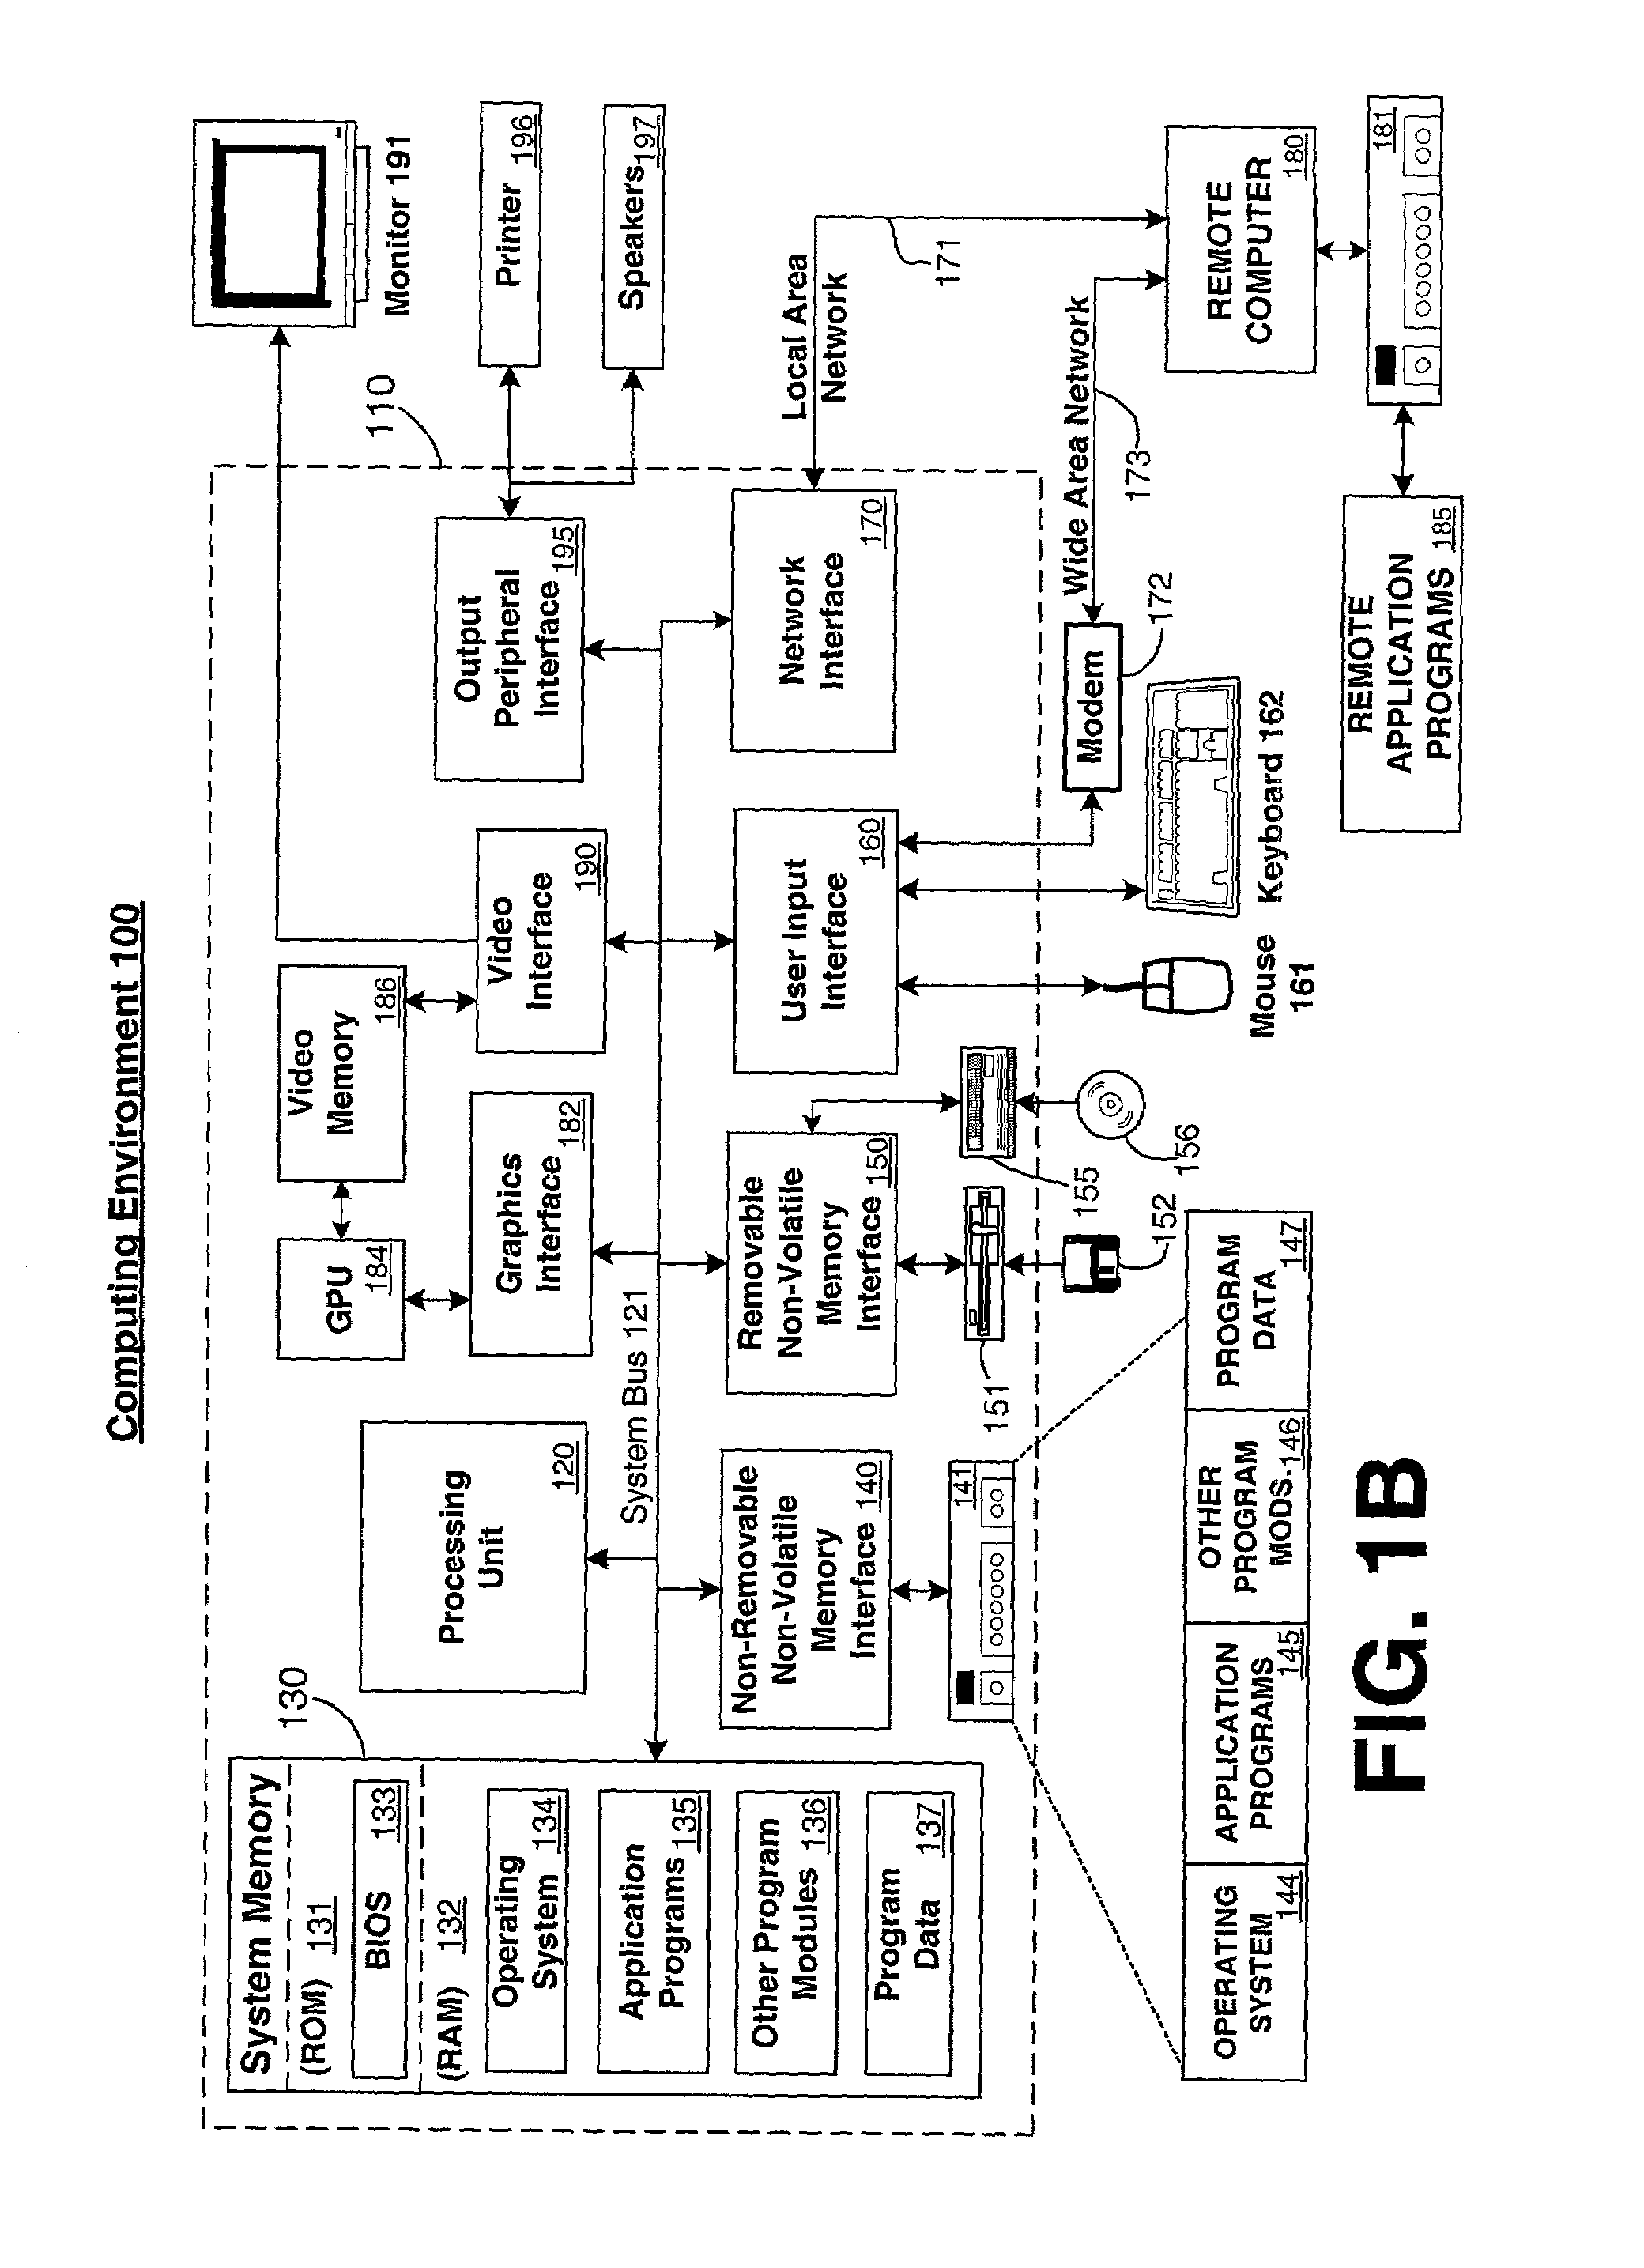 Systems and methods for interfacing with digital history data